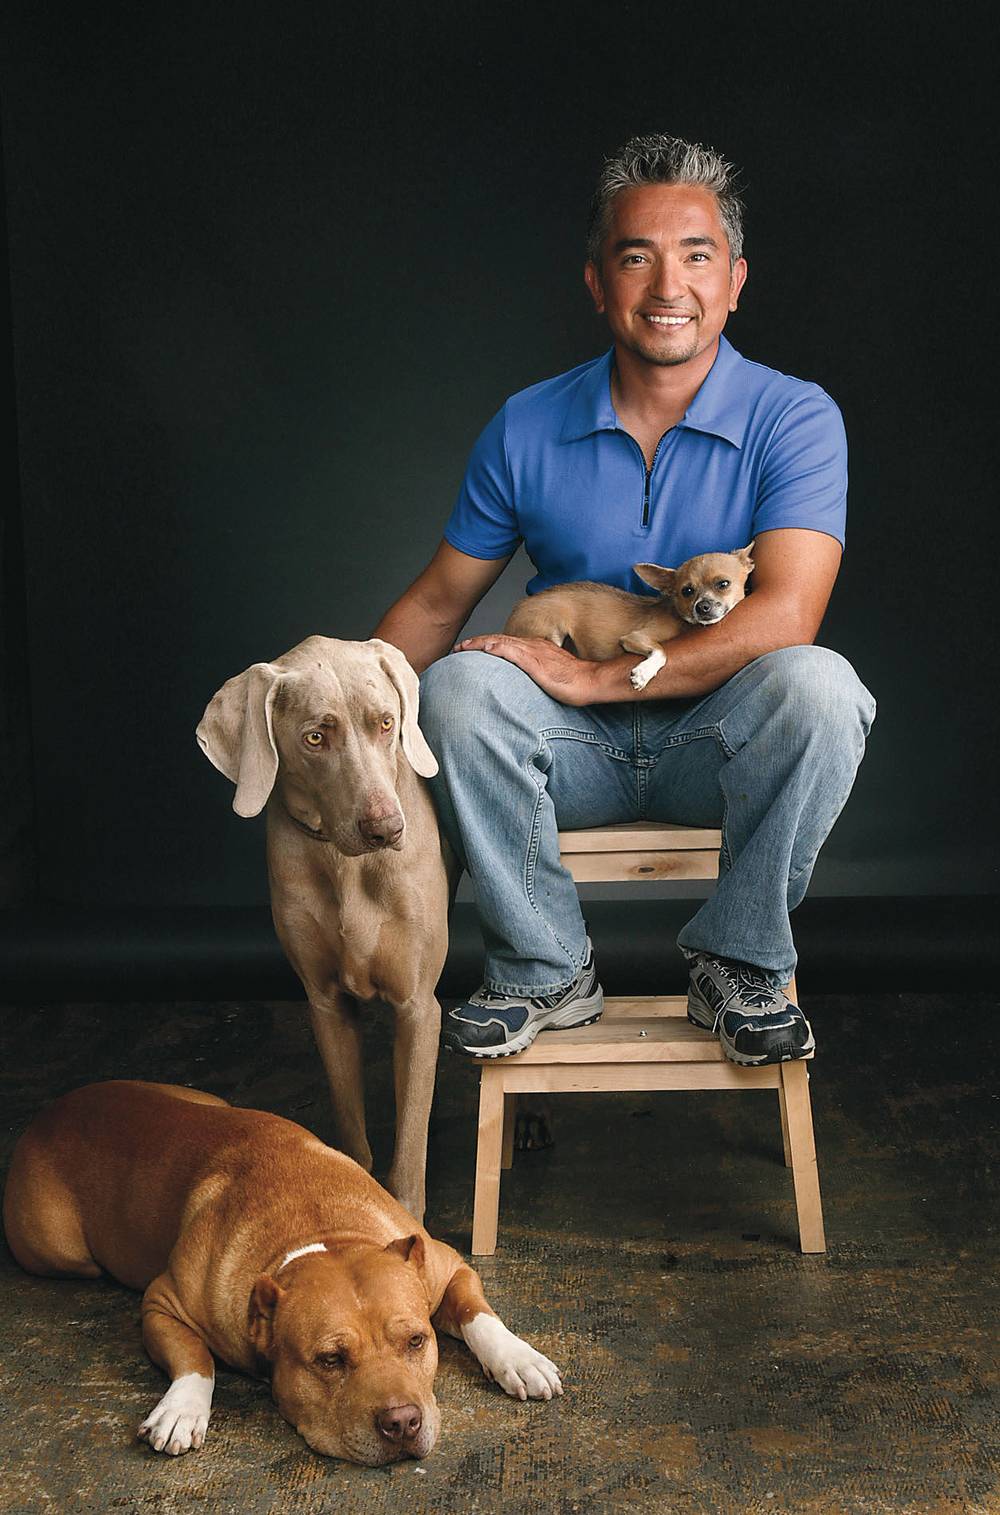 Dog Whisperer Cesar Millan offers up canine advice and